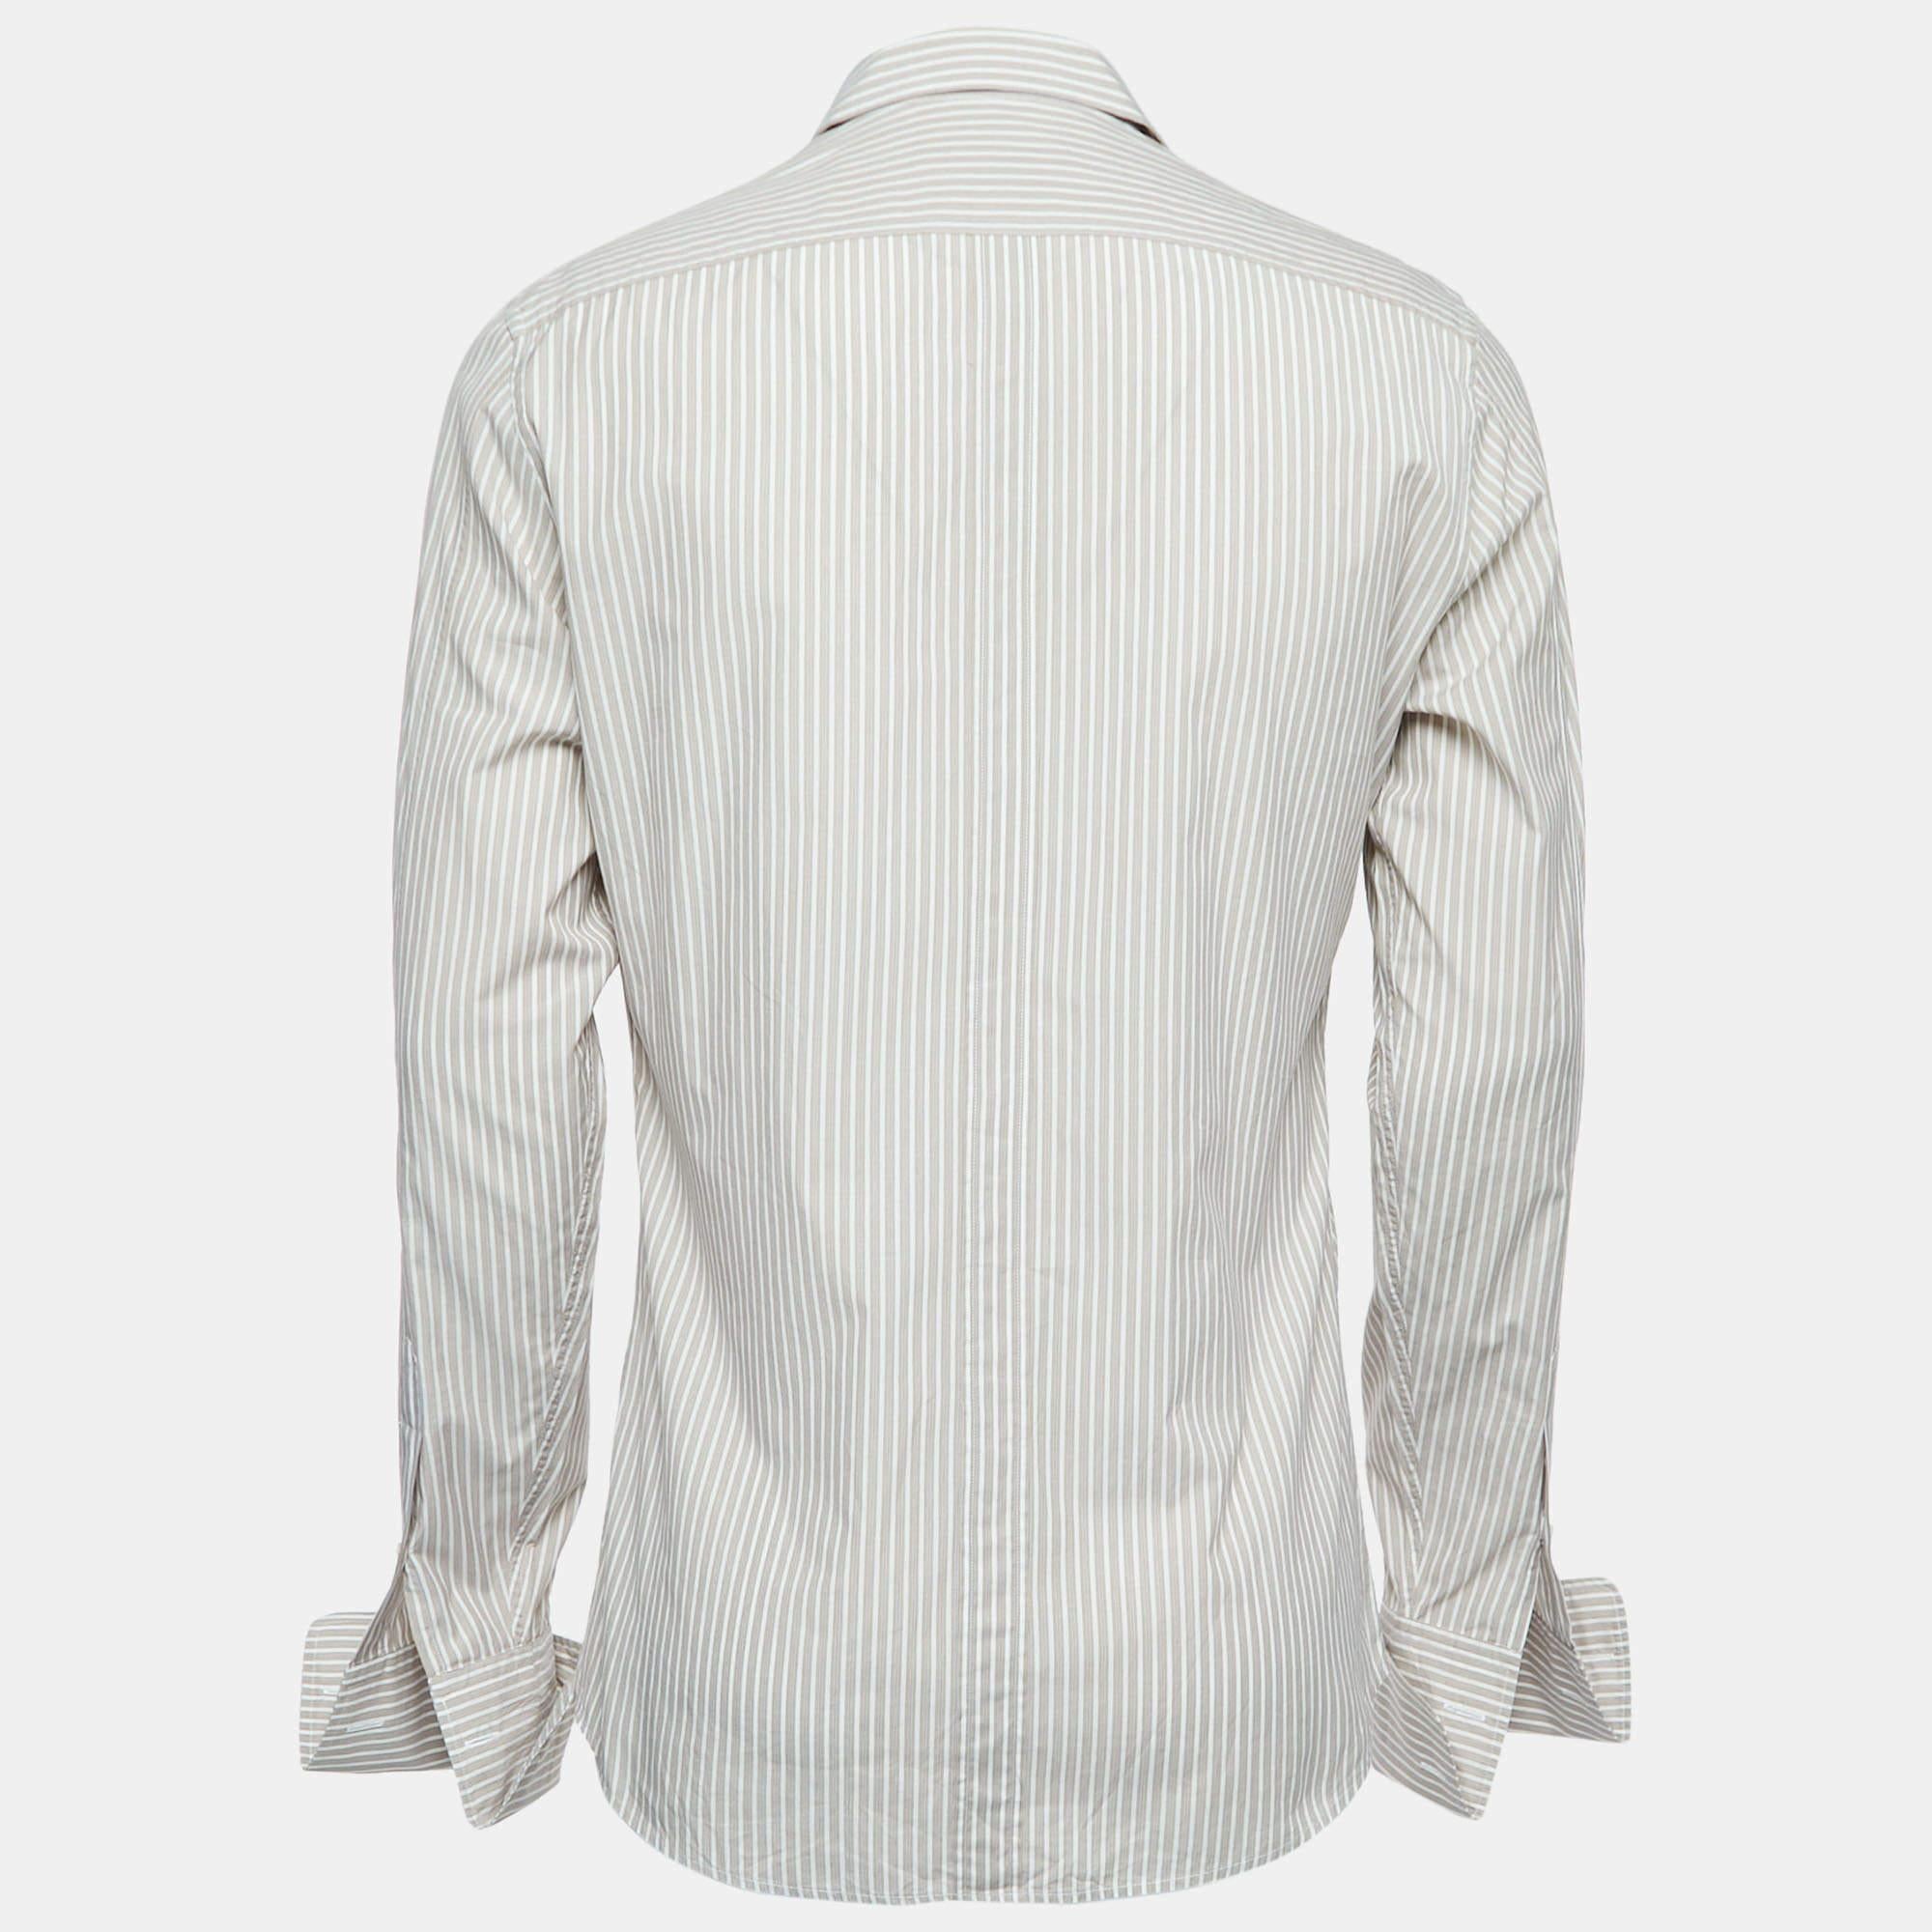 Shirts are an indispensable part of a wardrobe, so this brand brings you a creation that is both versatile and stylish. It has been tailored from quality material in a versatile shade. The shirt is detailed with signature elements and a comfortable